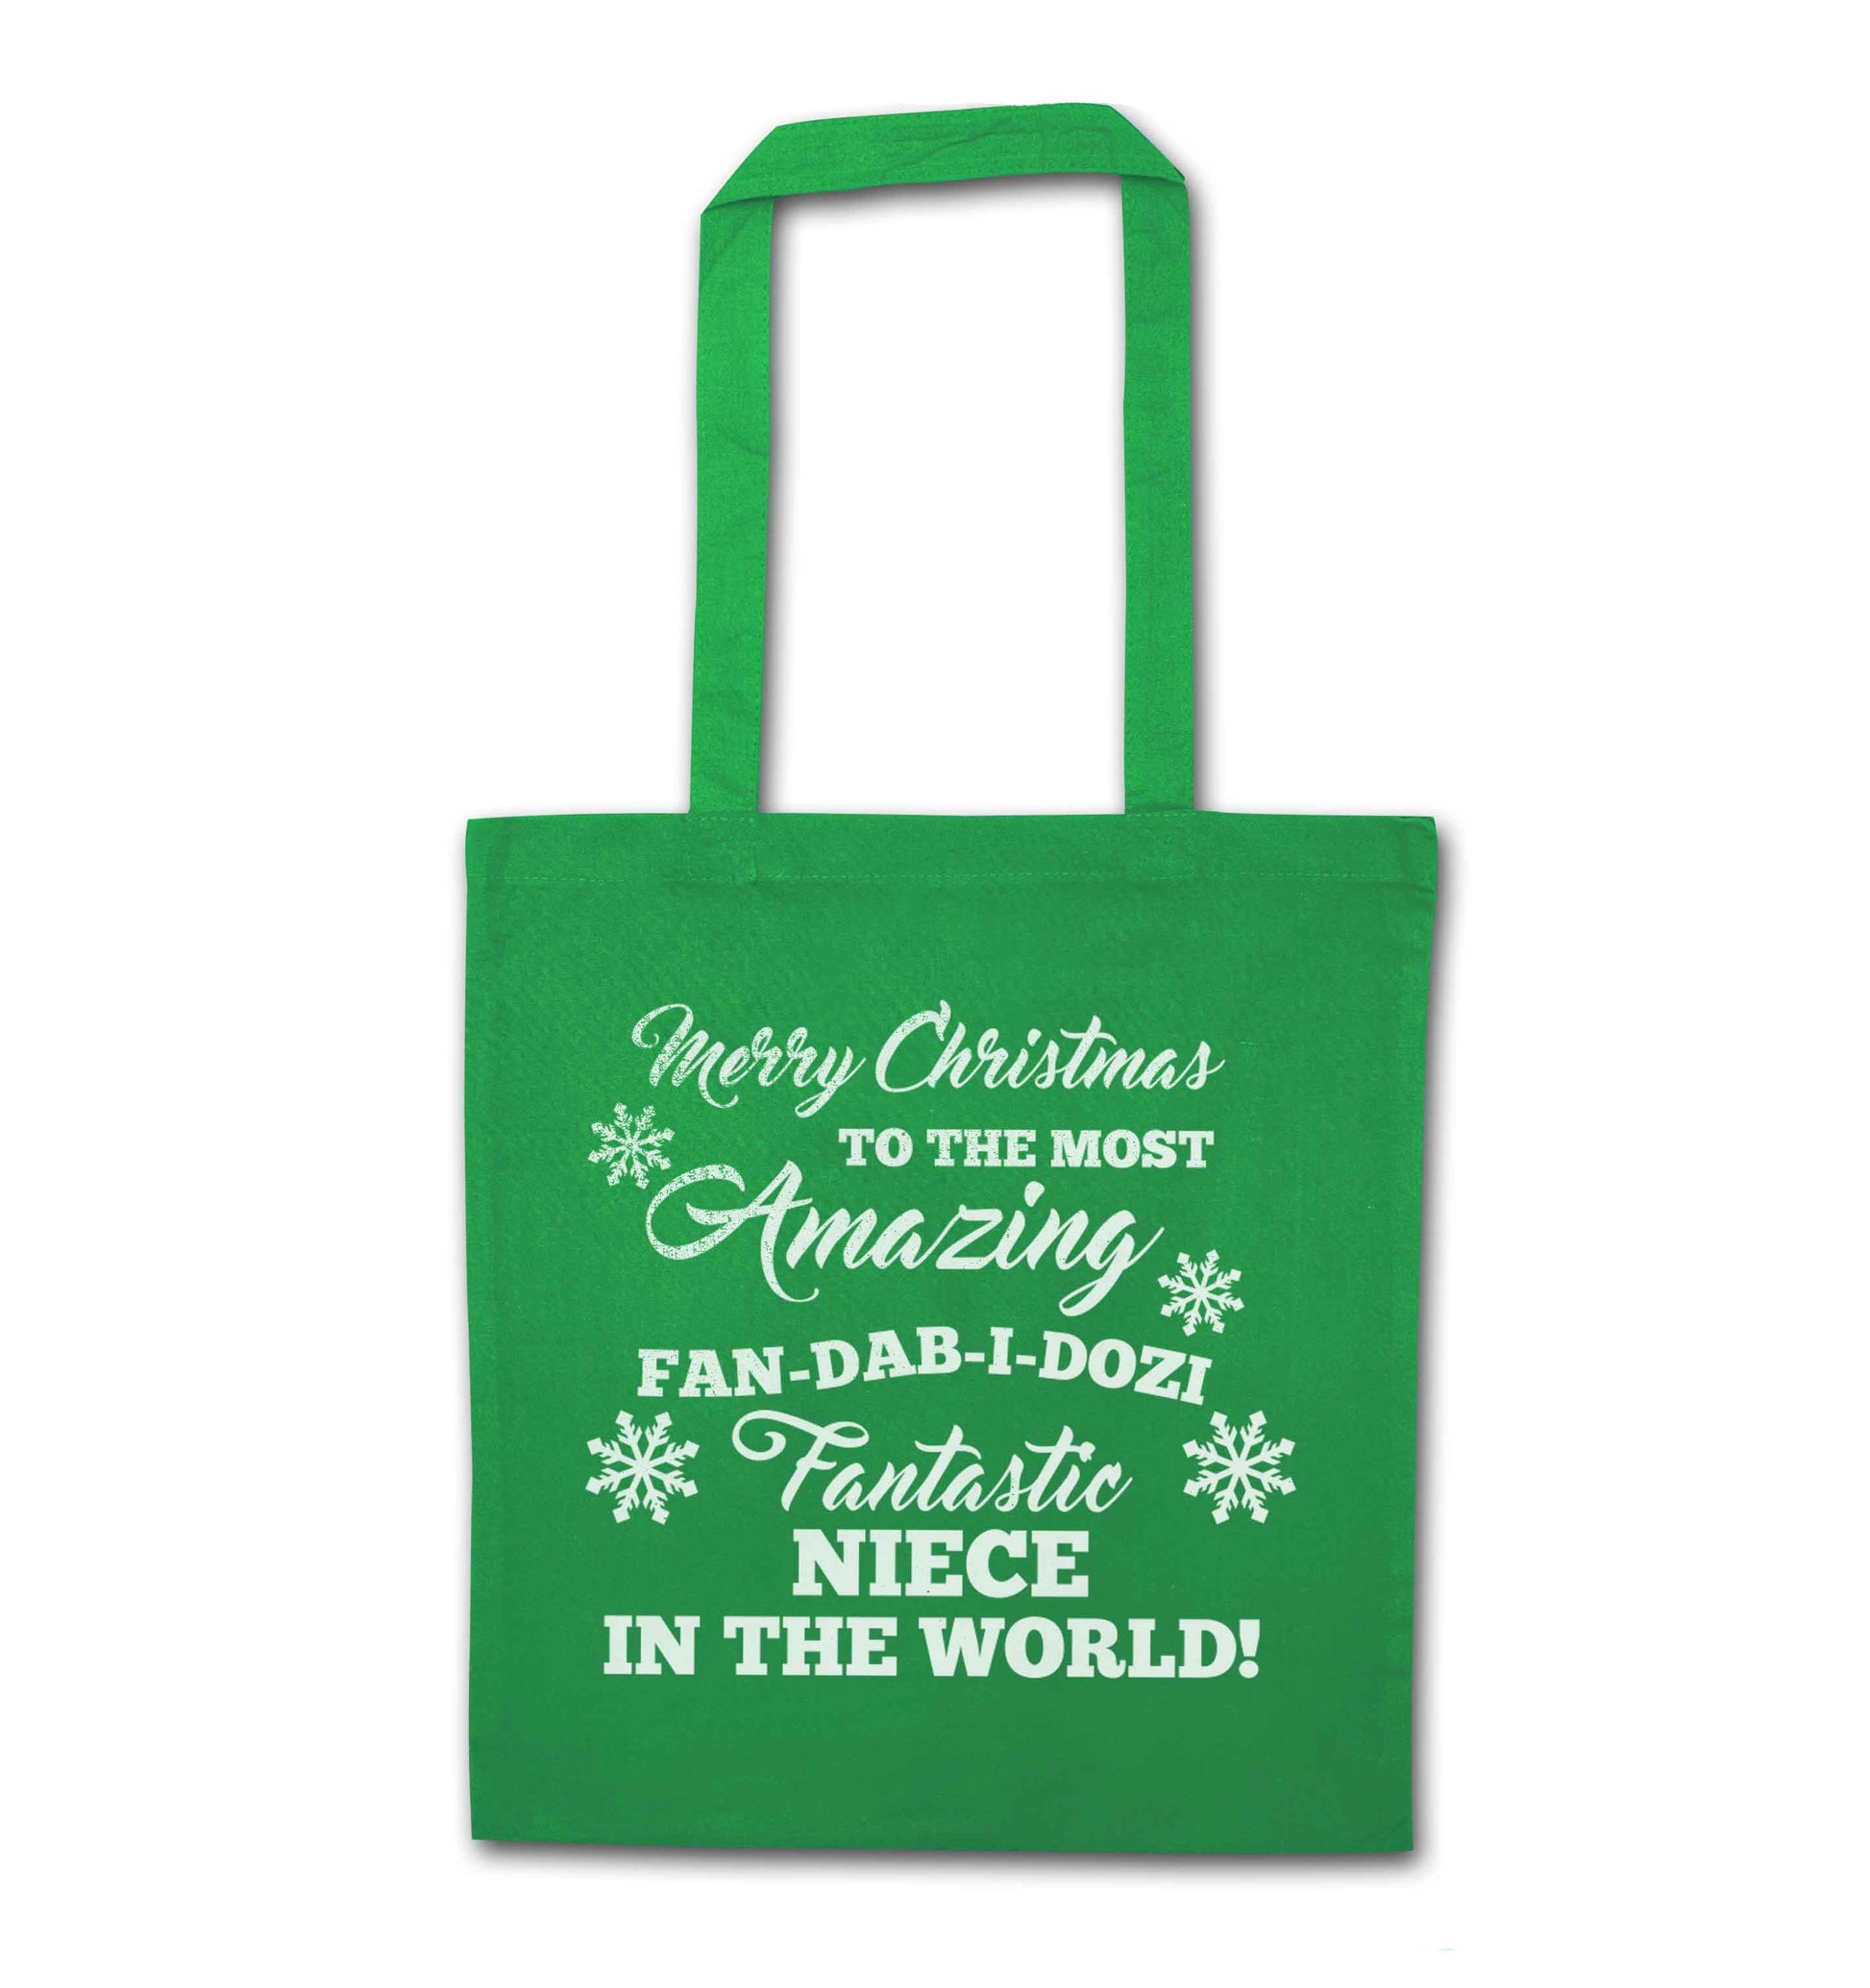 Merry Christmas to the most amazing fan-dab-i-dozi fantasic Niece in the world green tote bag